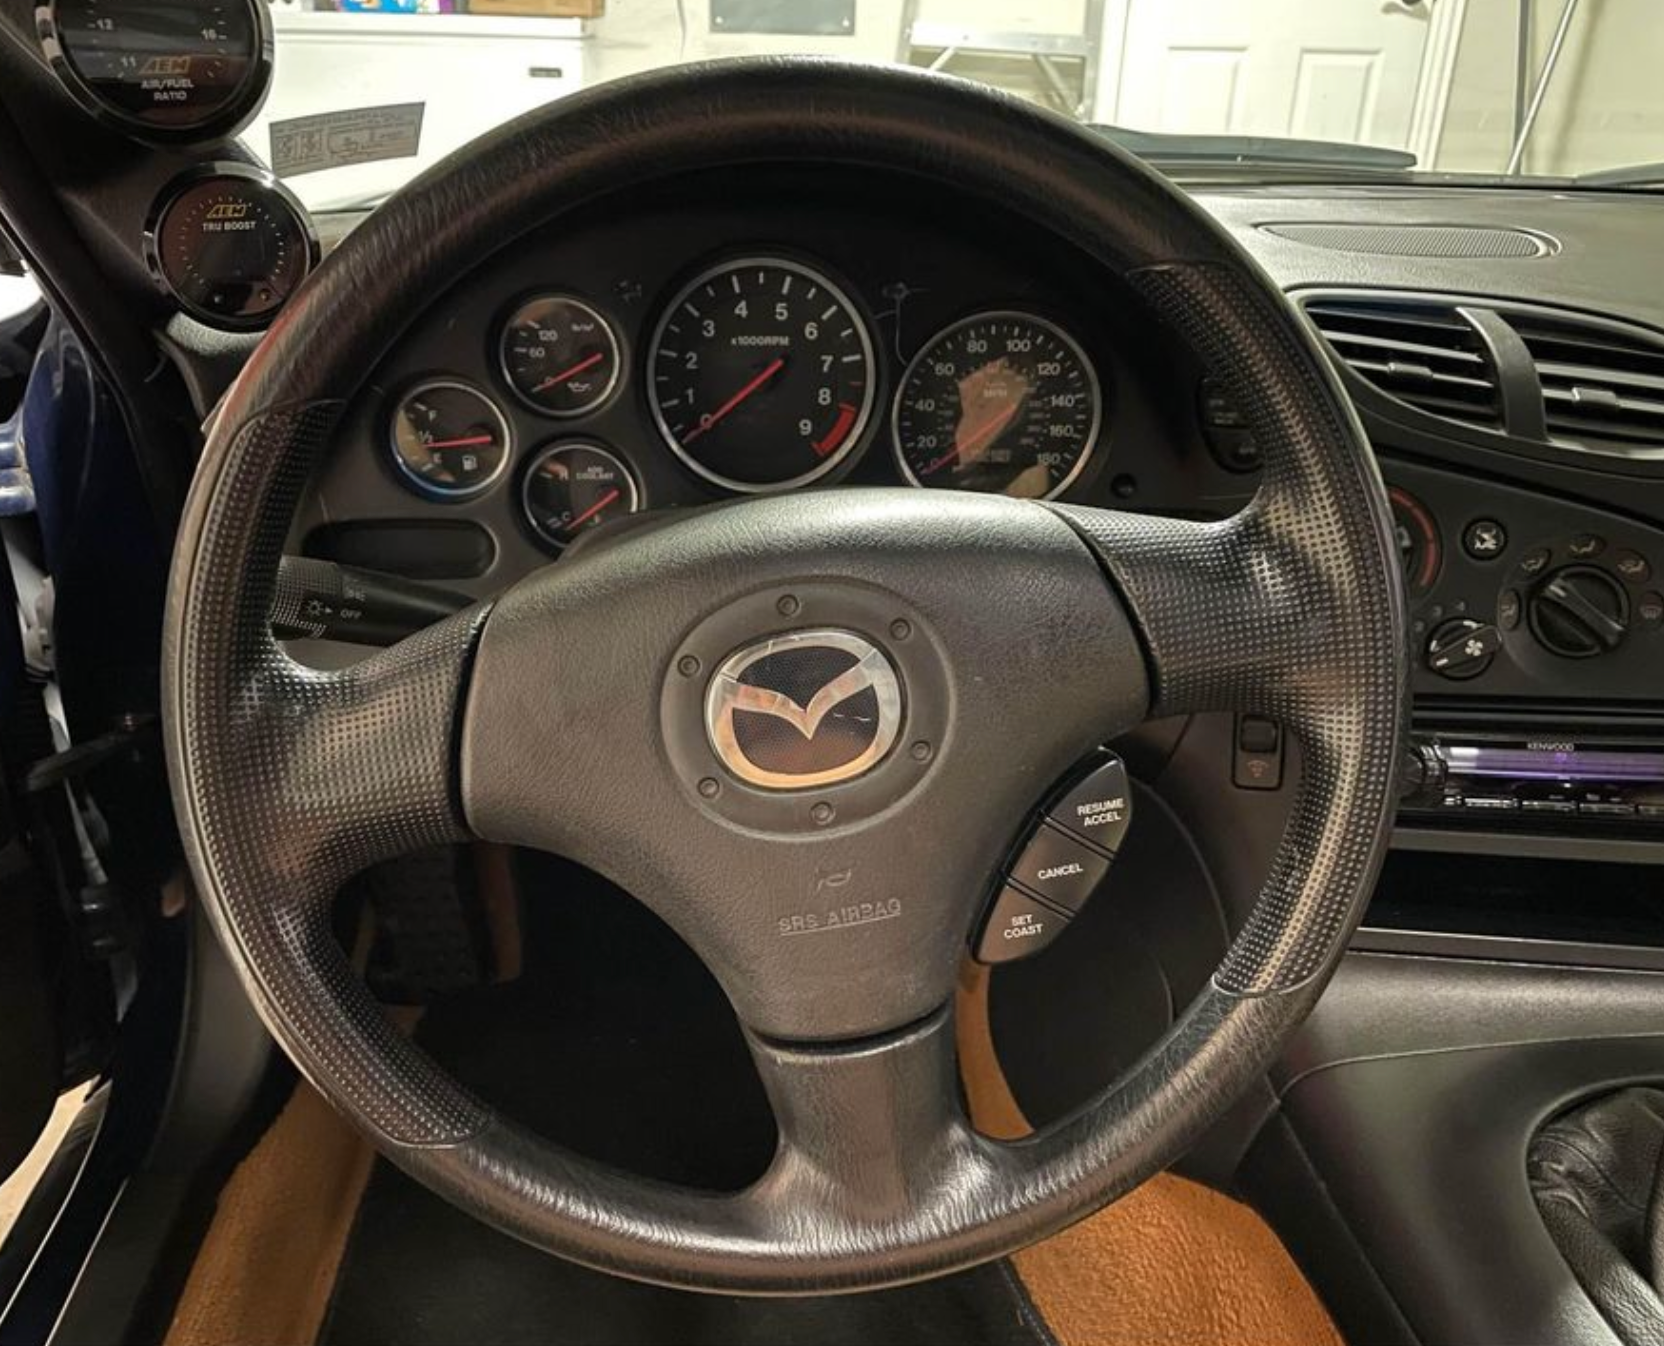 Interior/Upholstery - Mazda RX-7 Steering Wheel W/ Cruise Control - Used - 1993 to 2002 Mazda RX-7 - Fort Worth, TX 76111, United States